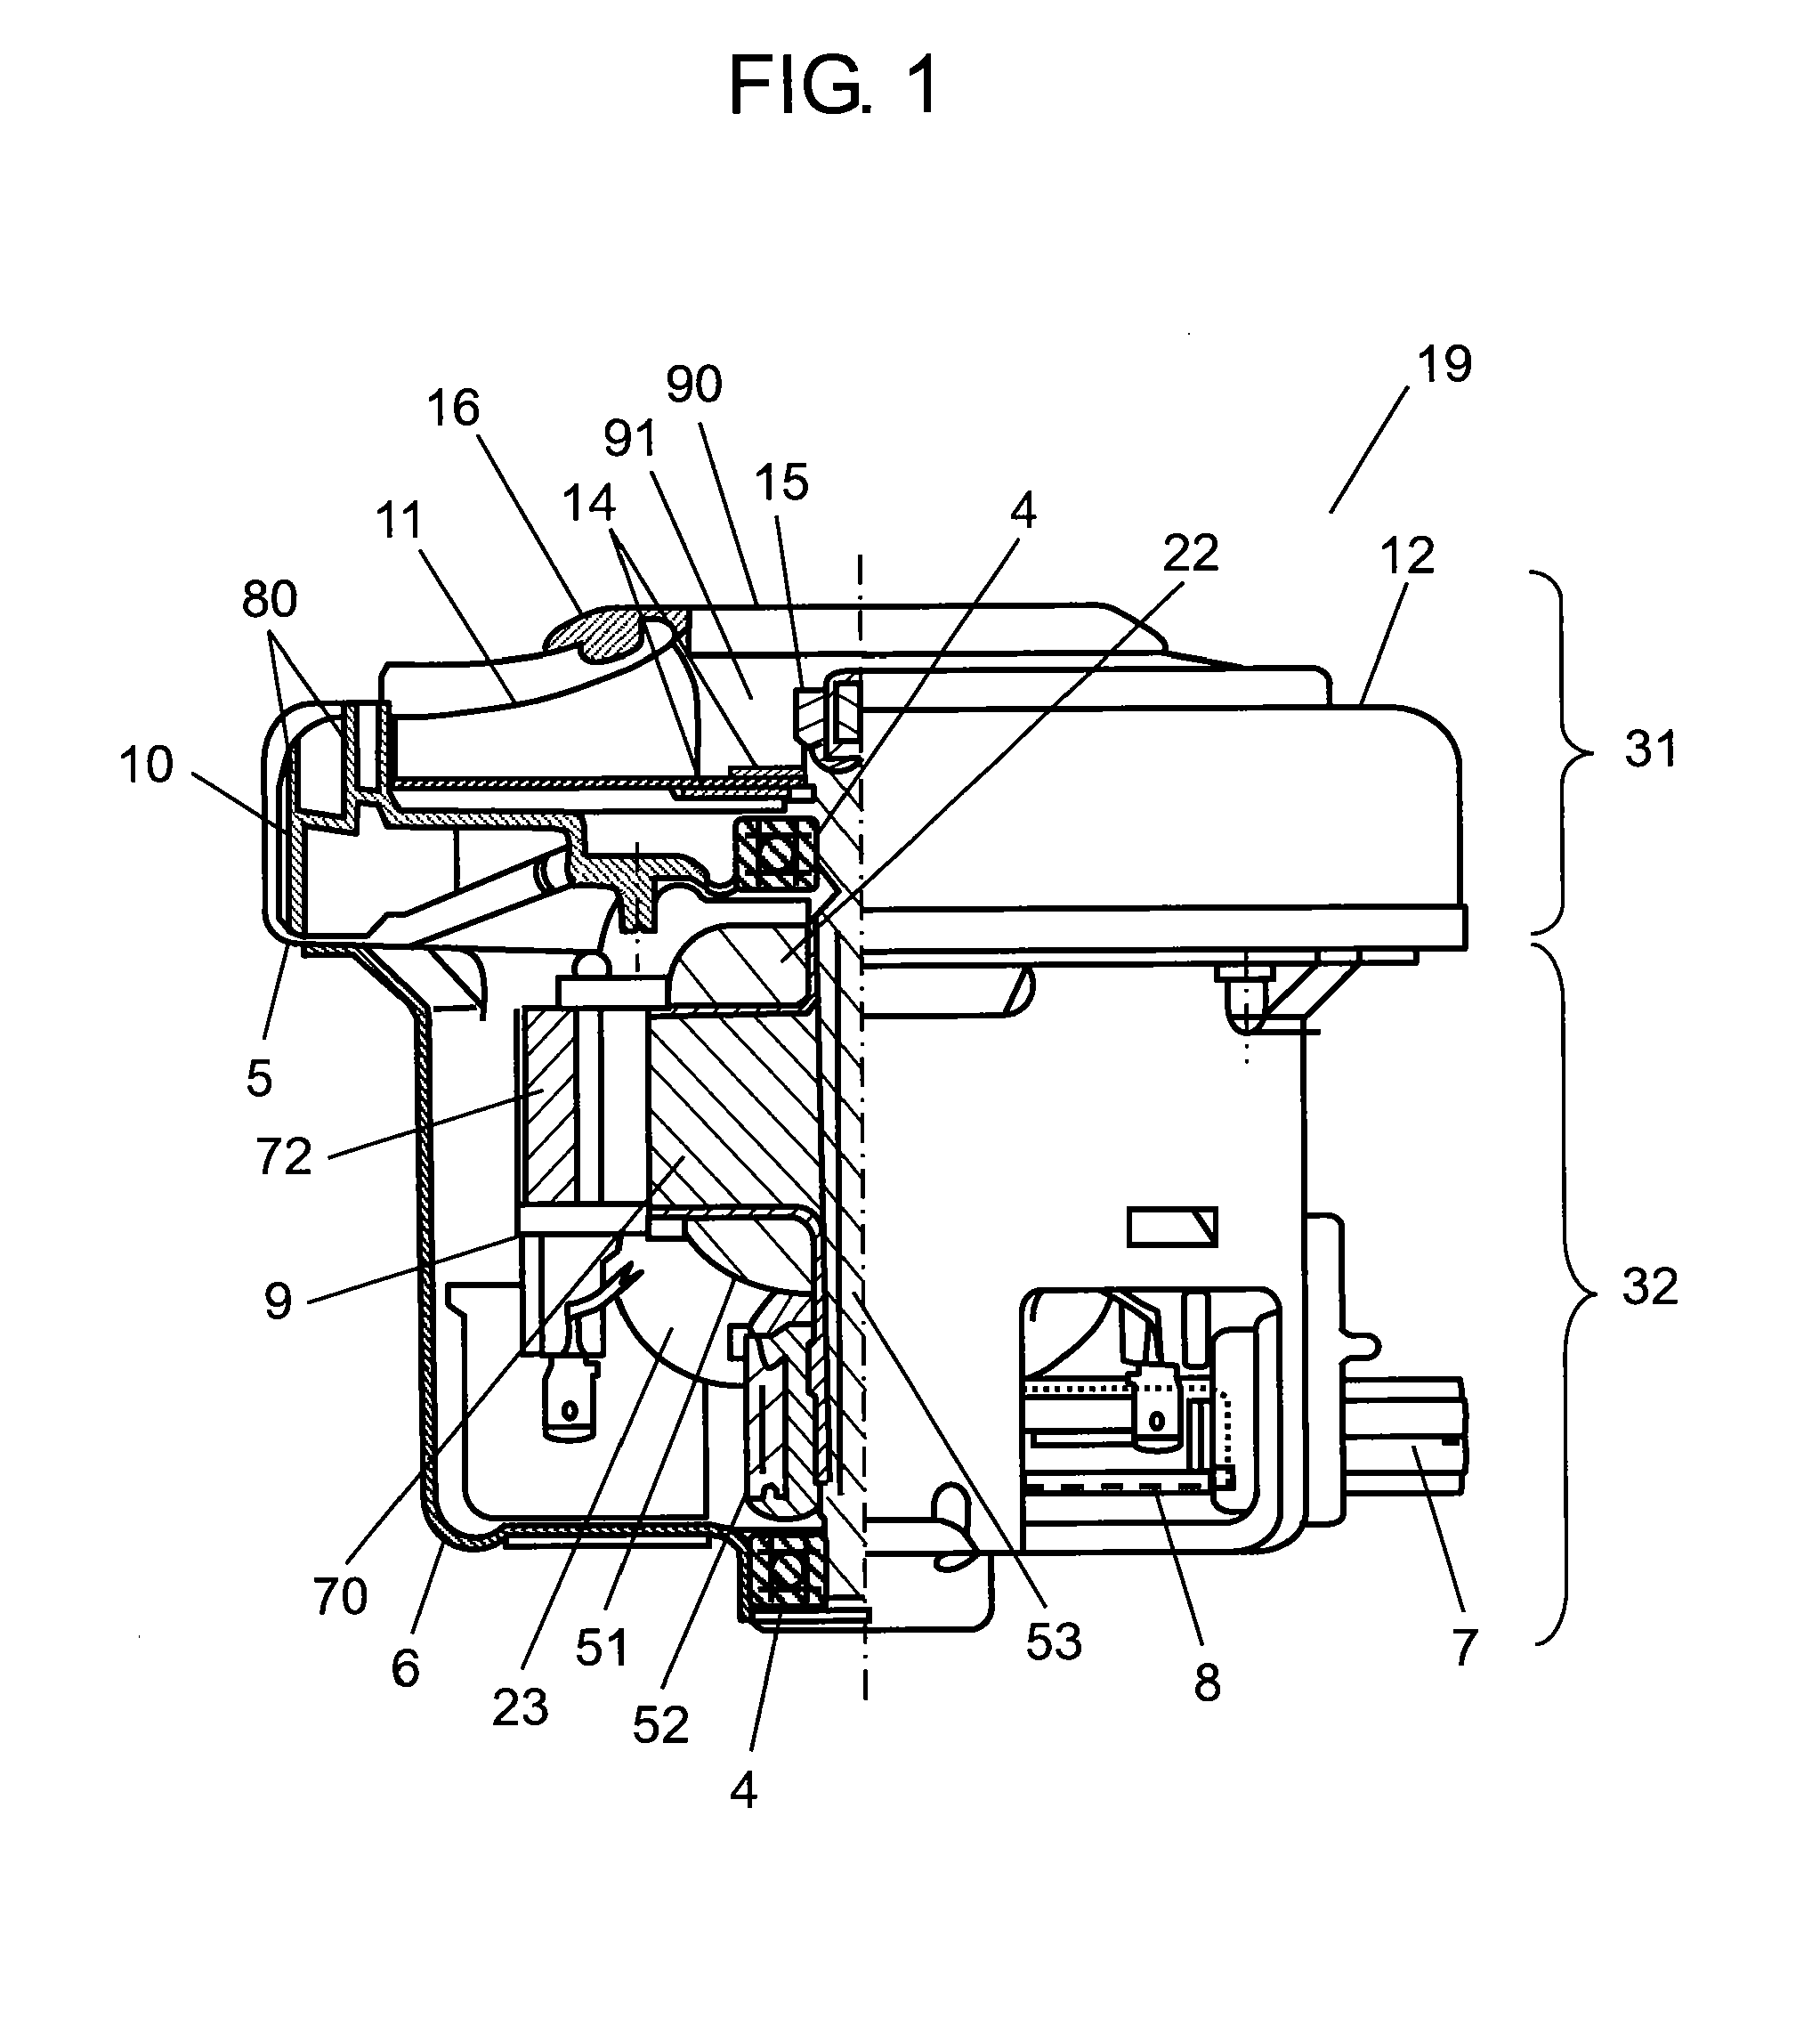 Electric blower and electric vacuum cleaner utilizing the same